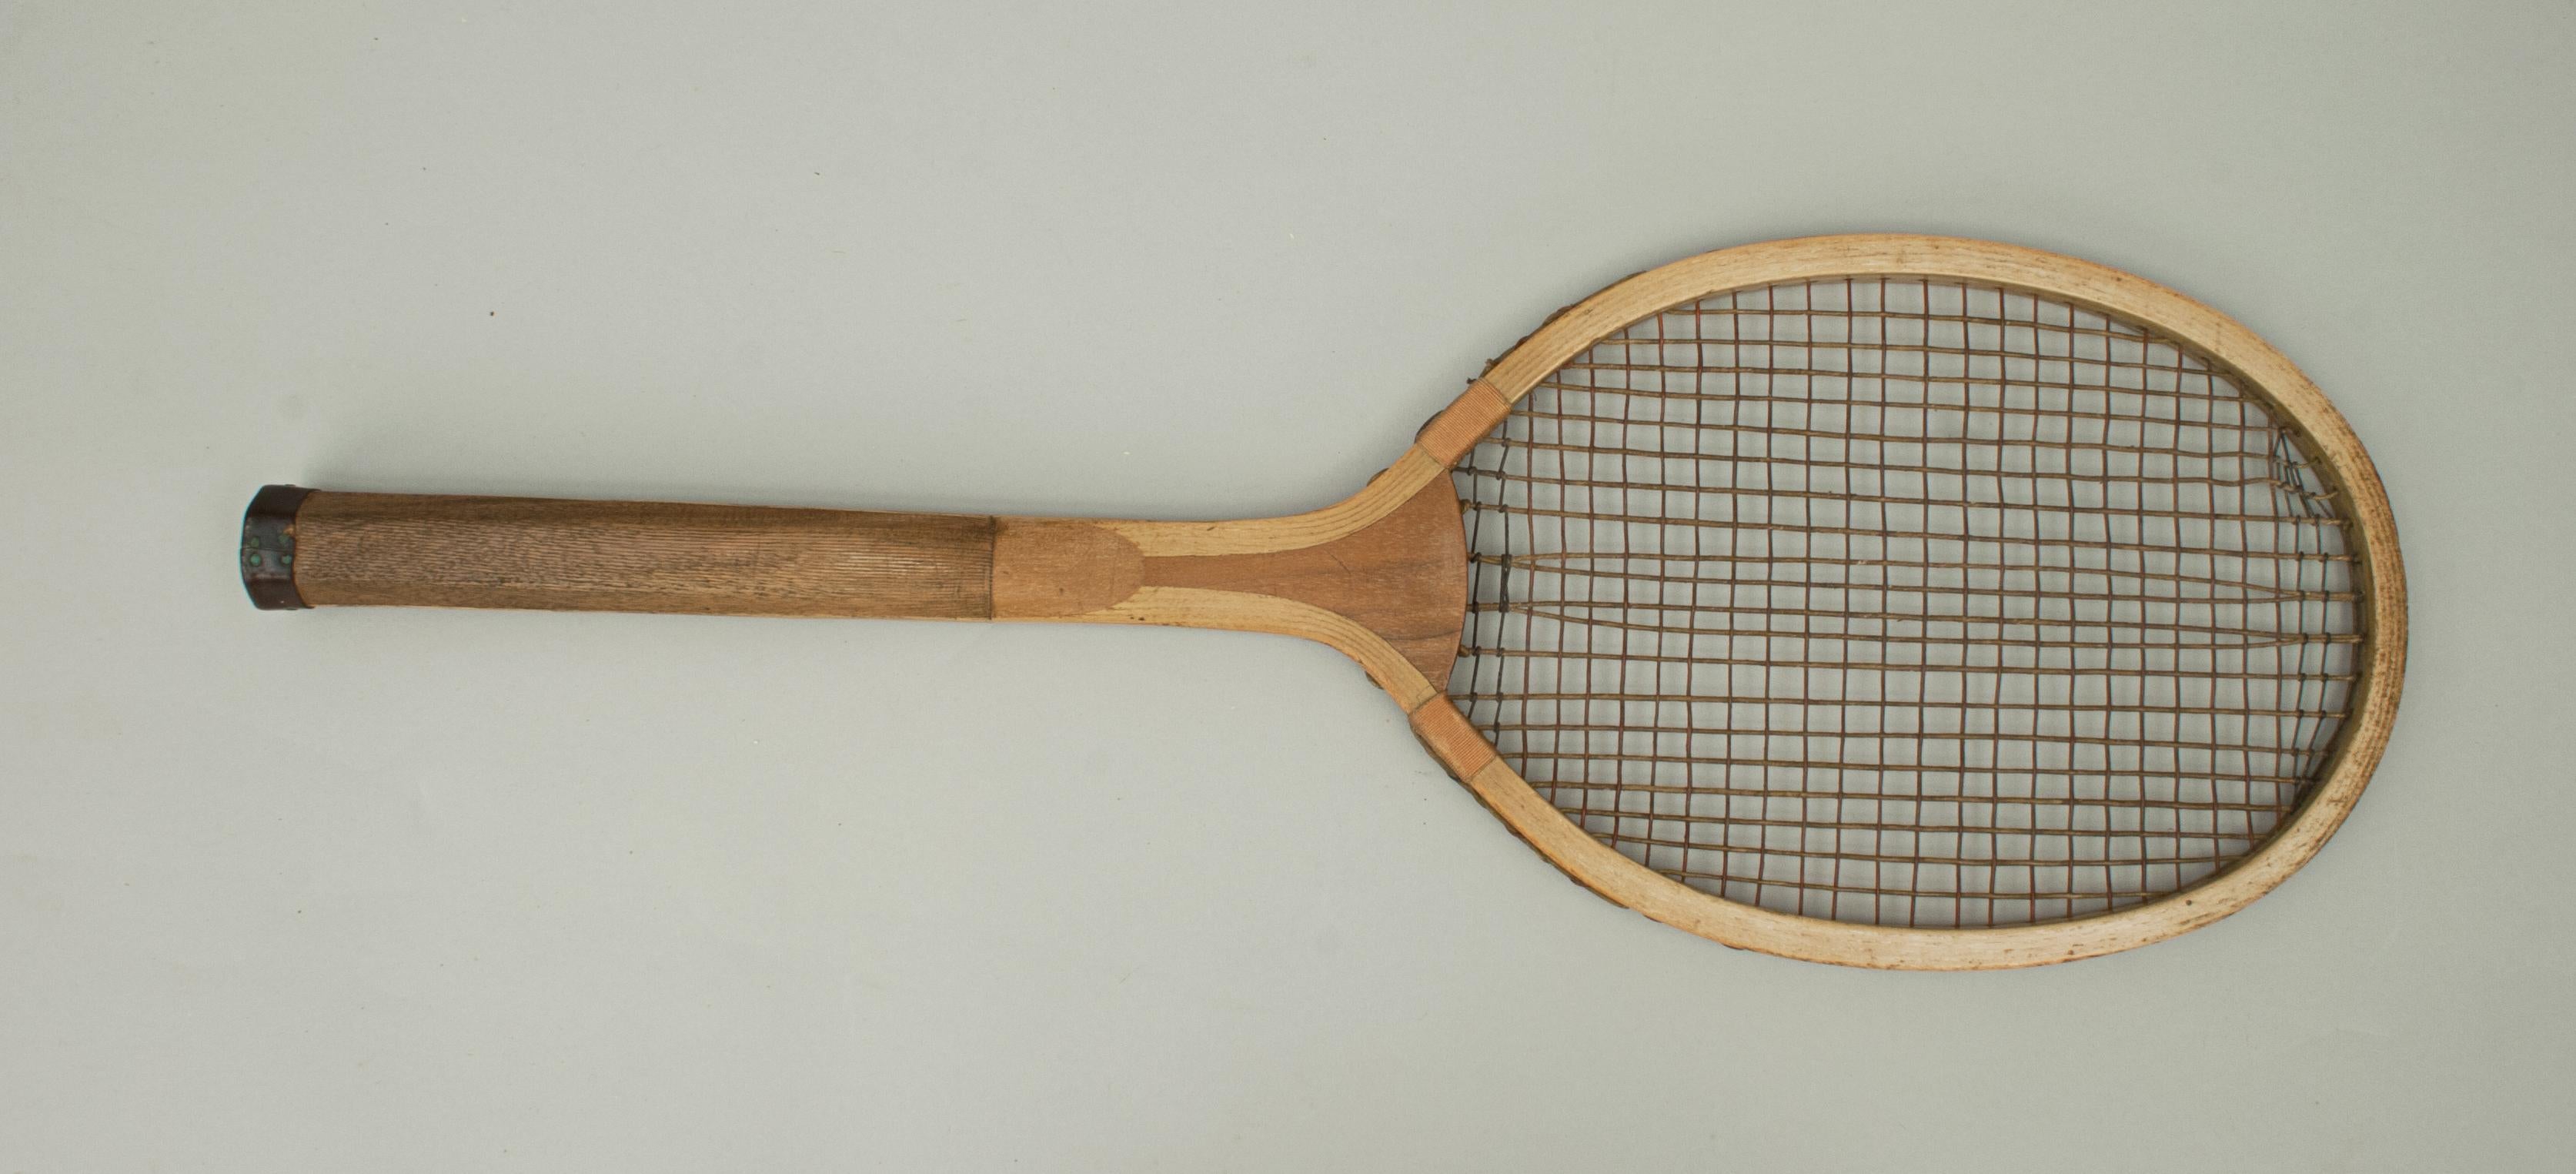 British Wooden Lawn Tennis Racket, the Service, Ltc For Sale